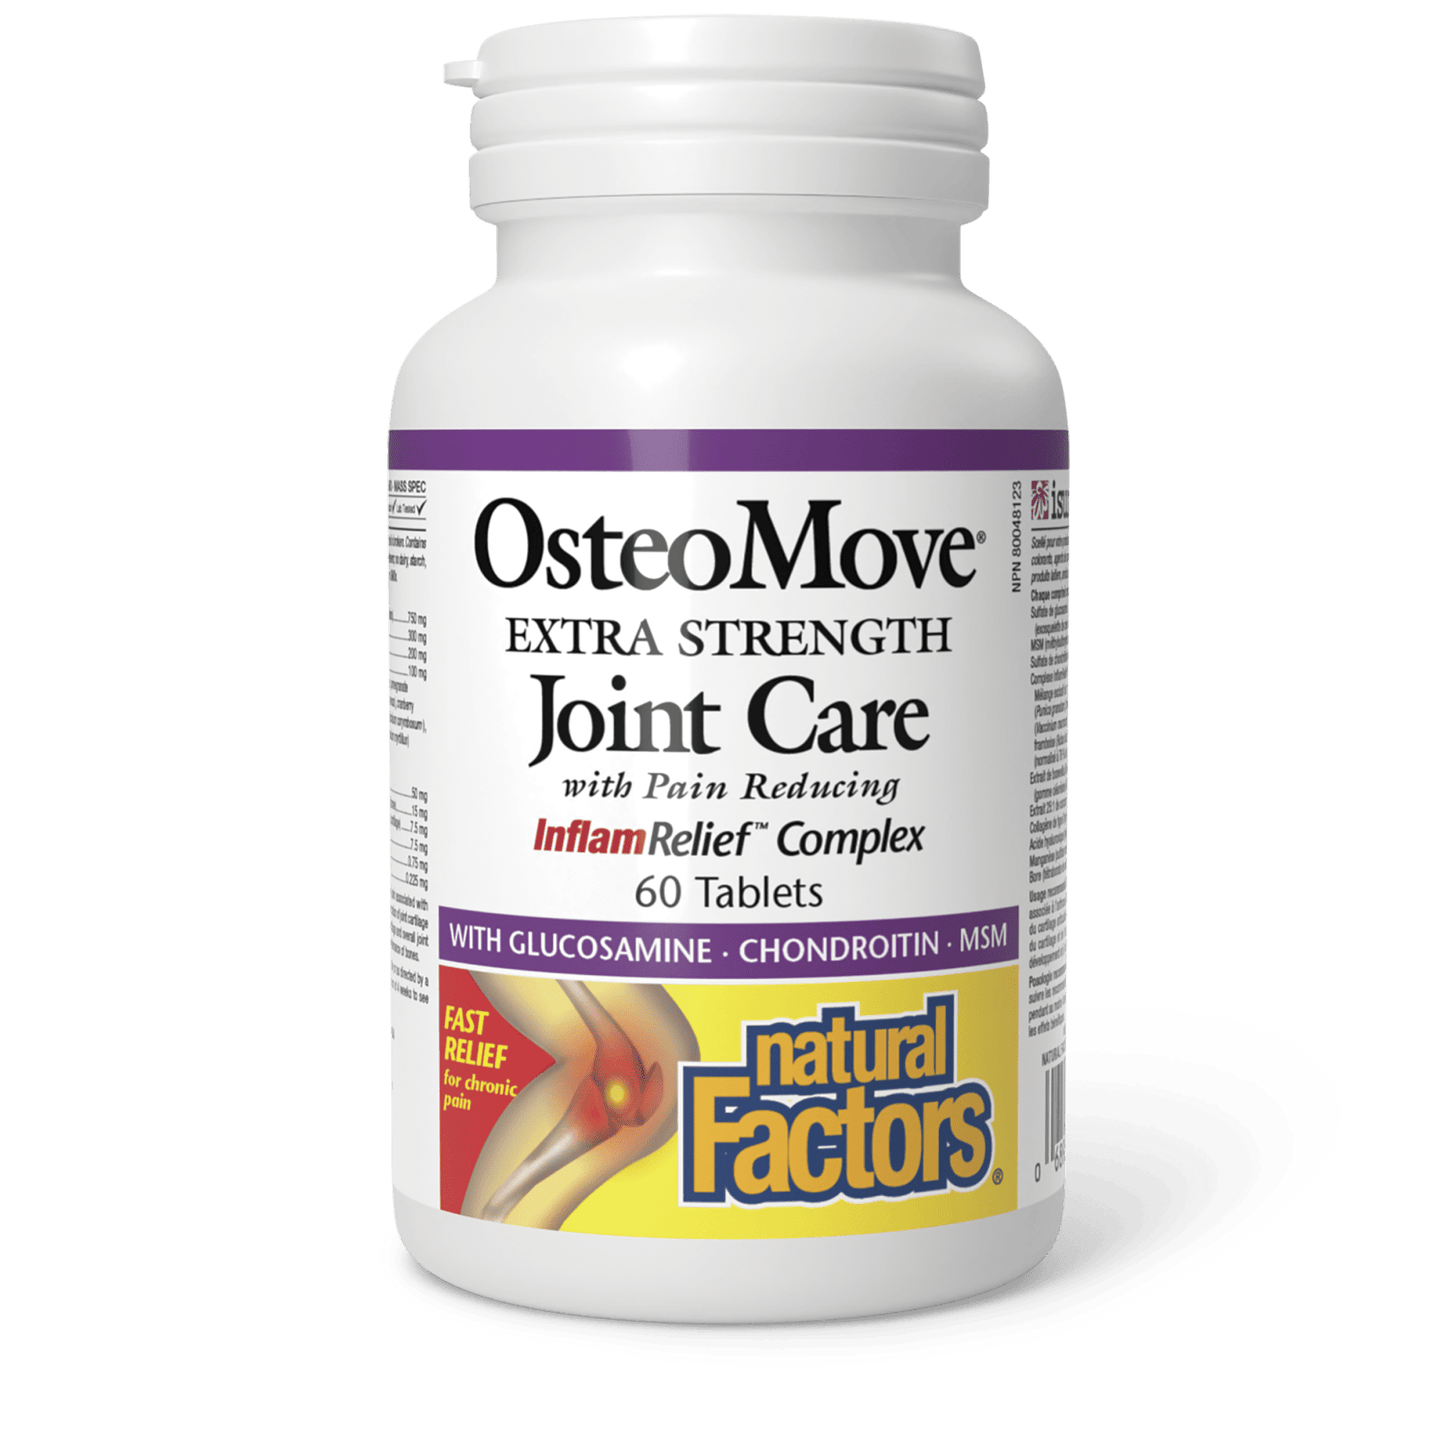 OsteoMove Joint Care Extra Strength, Natural Factors|v|image|26842